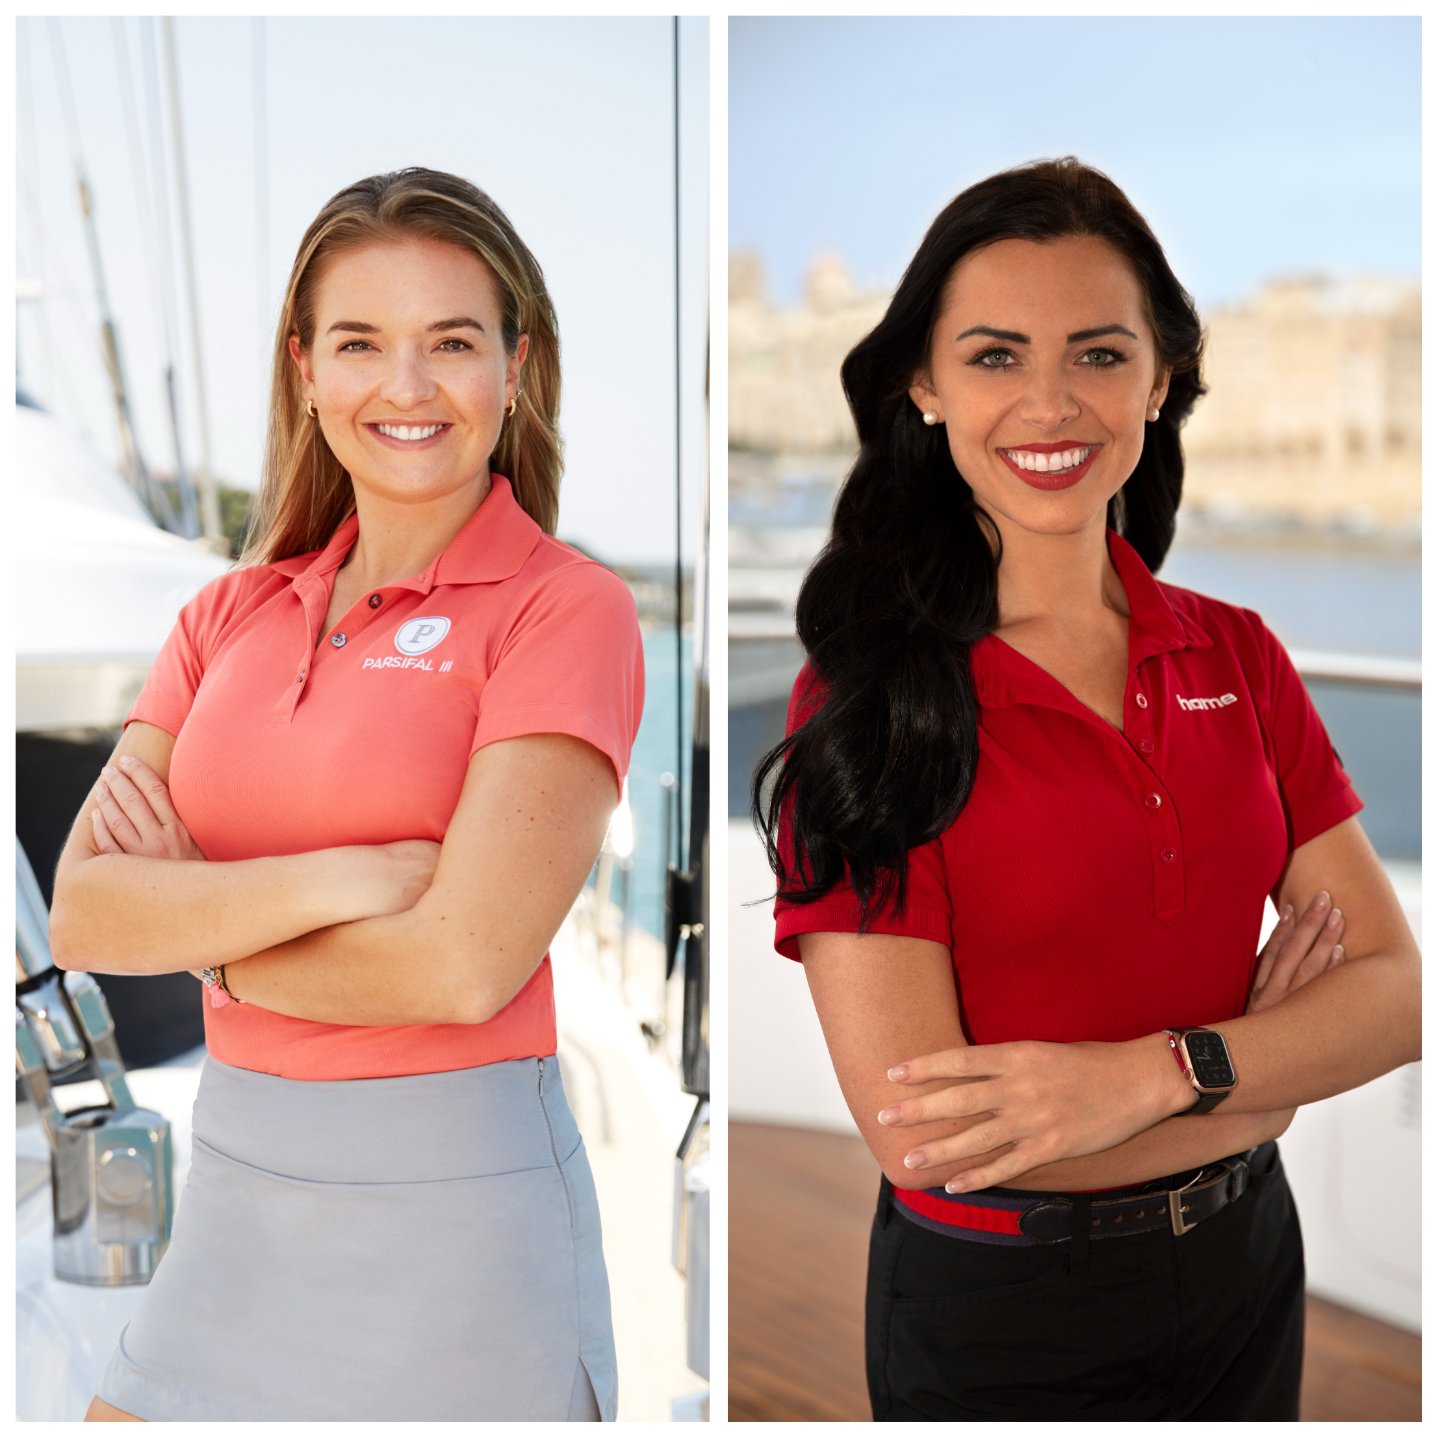 Below Deck Sailing Yacht's Daisy Kelliher and Below Deck Med's Natasha Webb share photos with their arms crossed